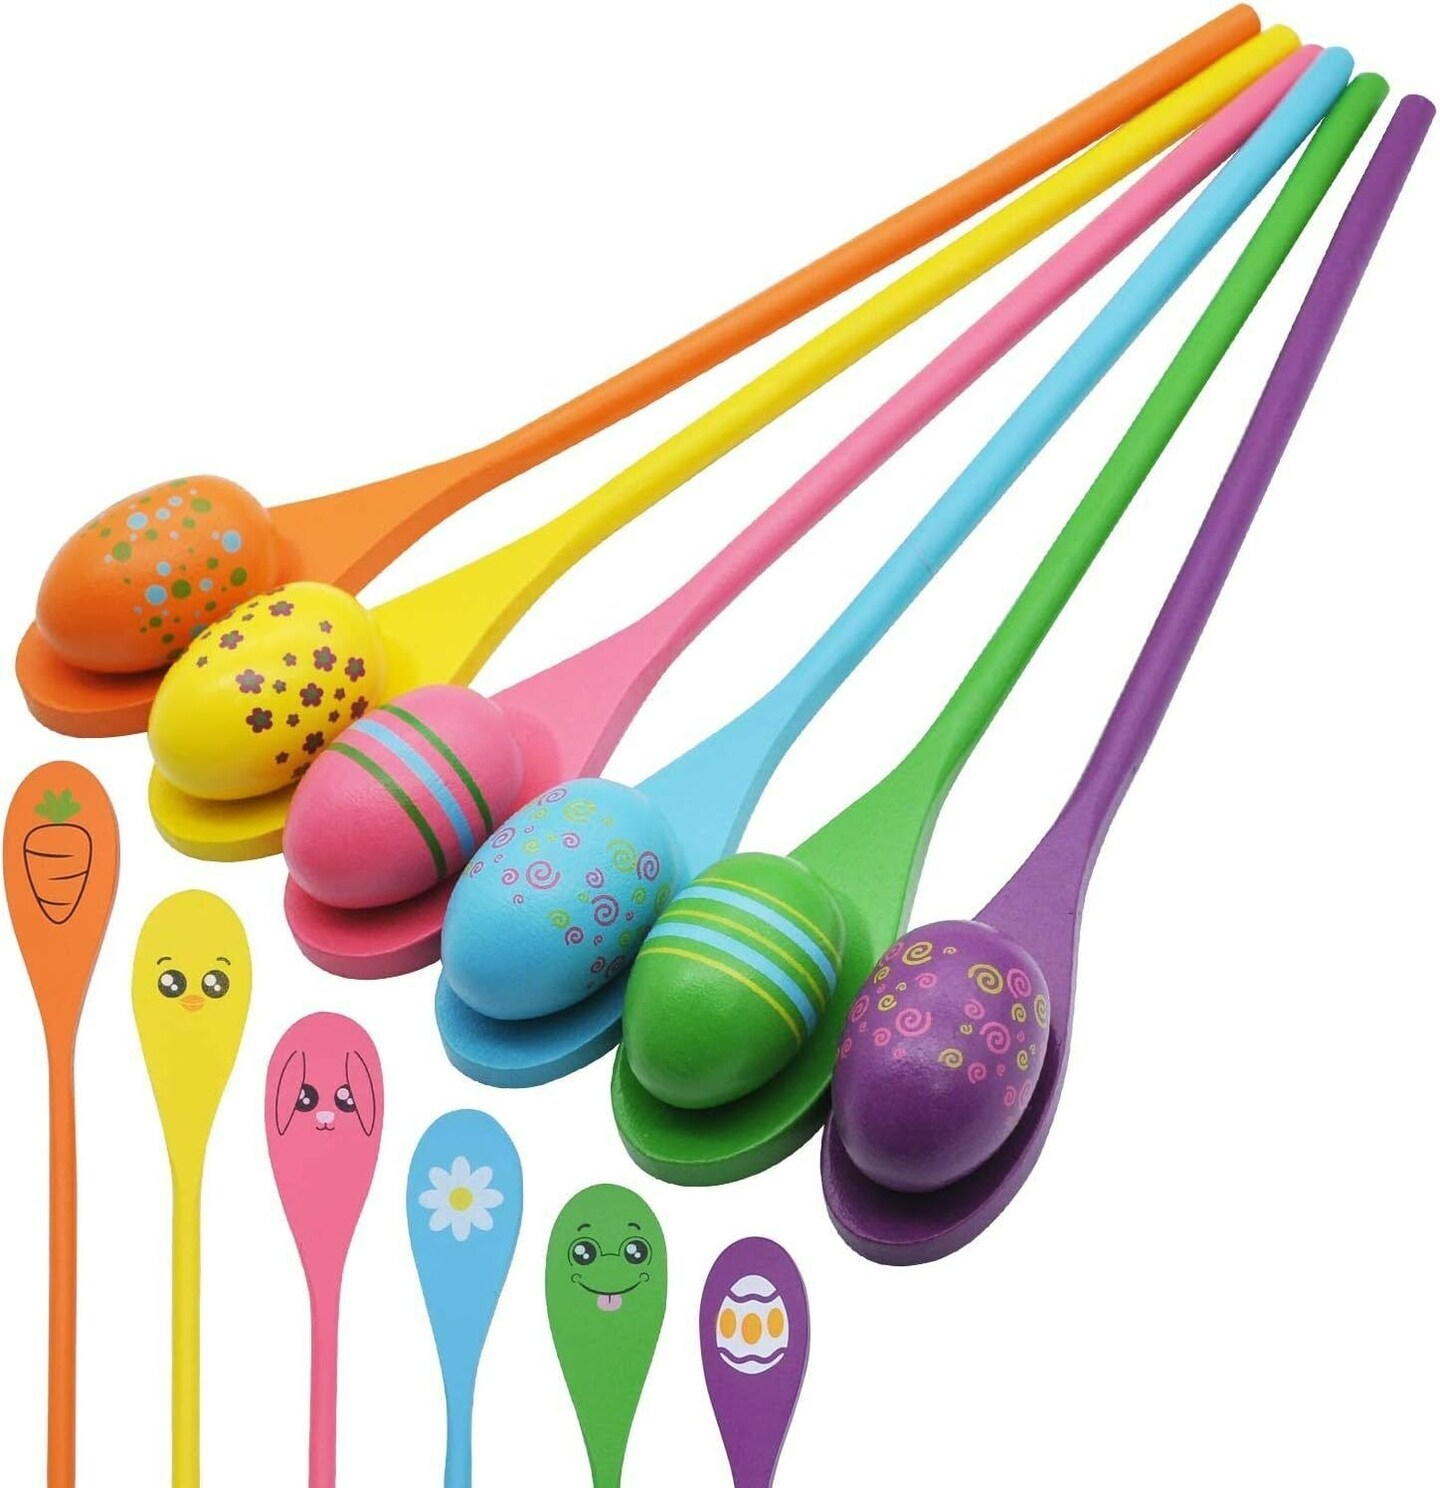 Easter Egg and Spoon Race Game Set 6 Eyeballs and Spoons with Assorted Colors